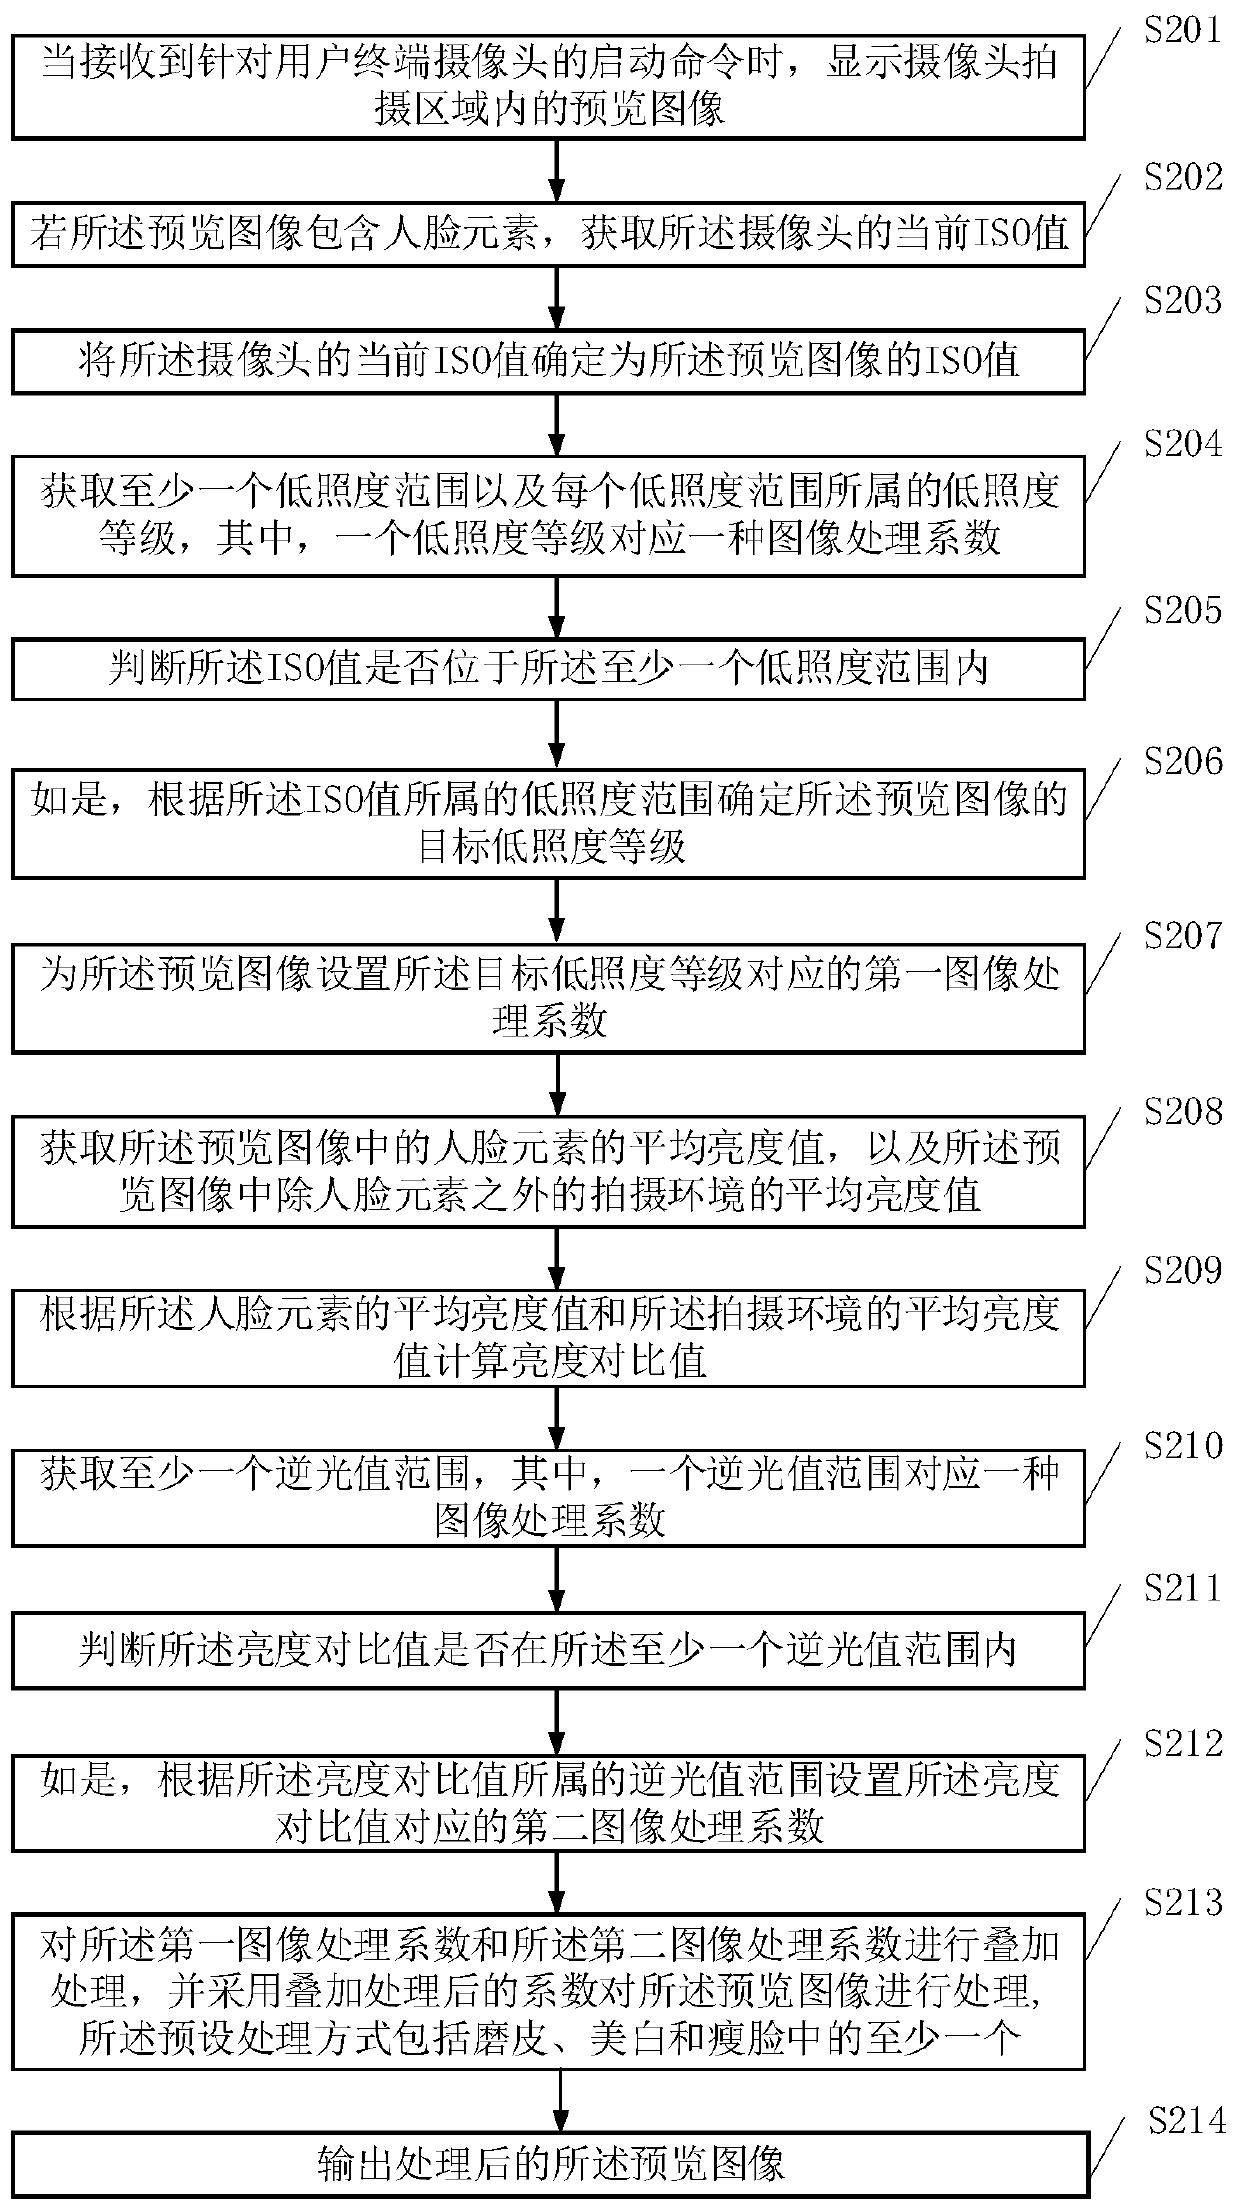 An image processing method and user terminal